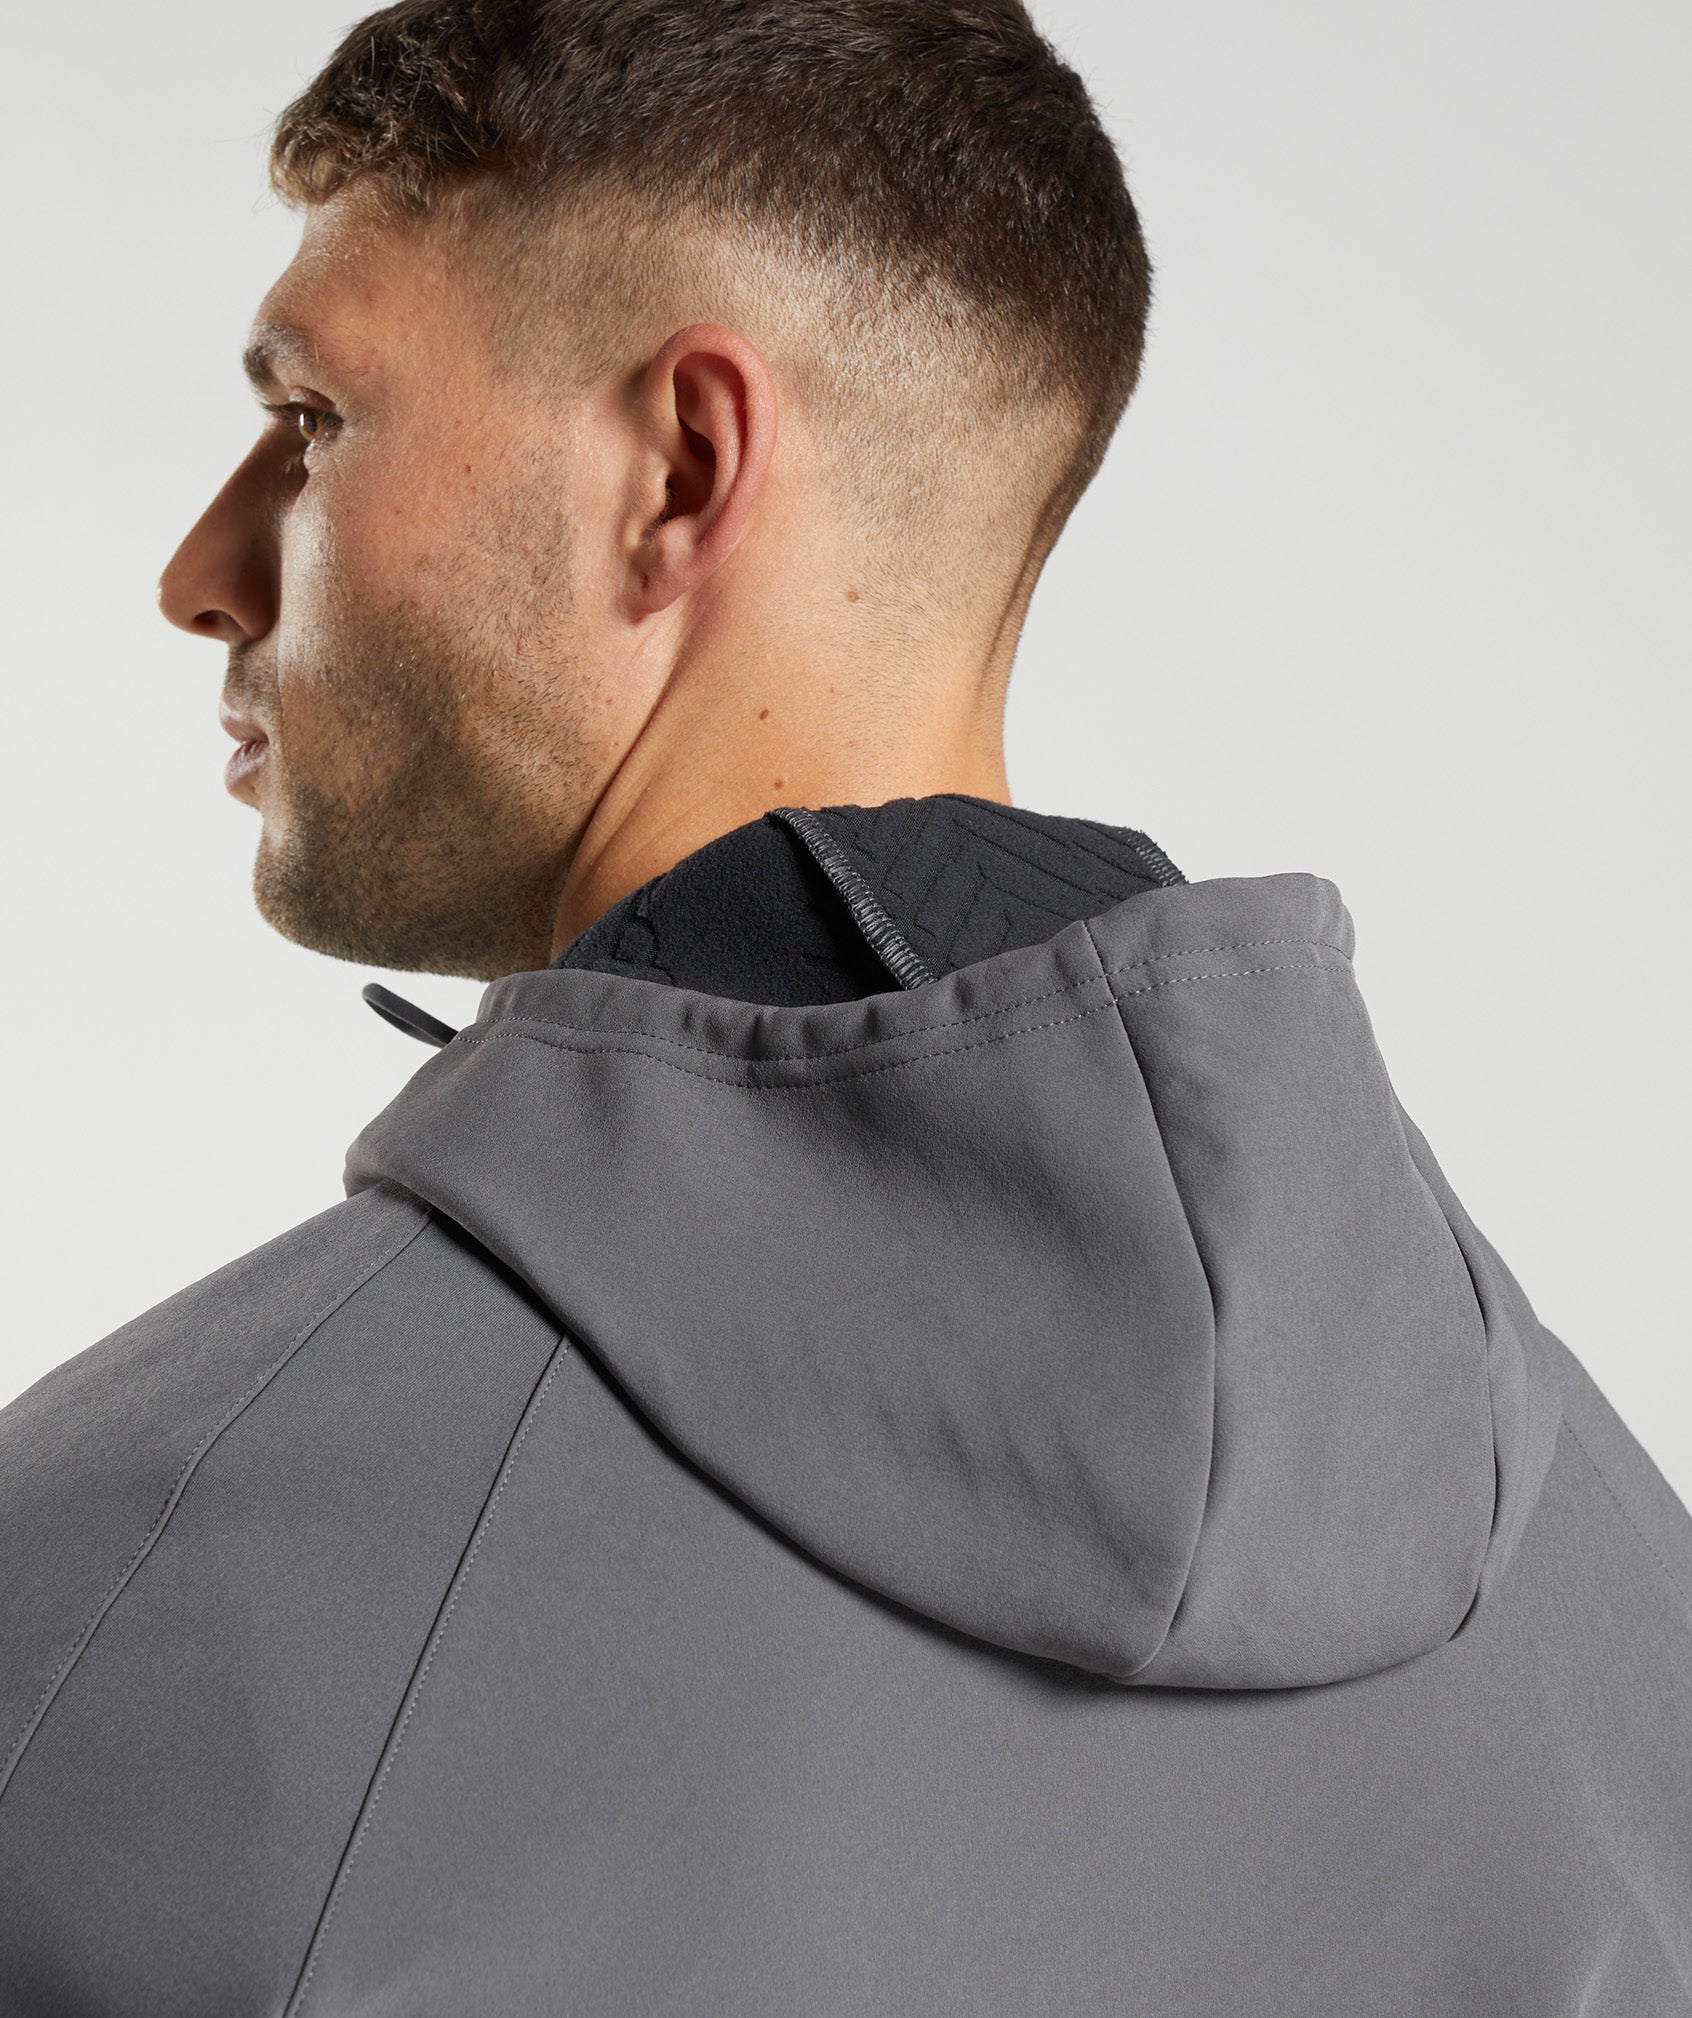 Apex Jacket in Silhouette Grey - view 6